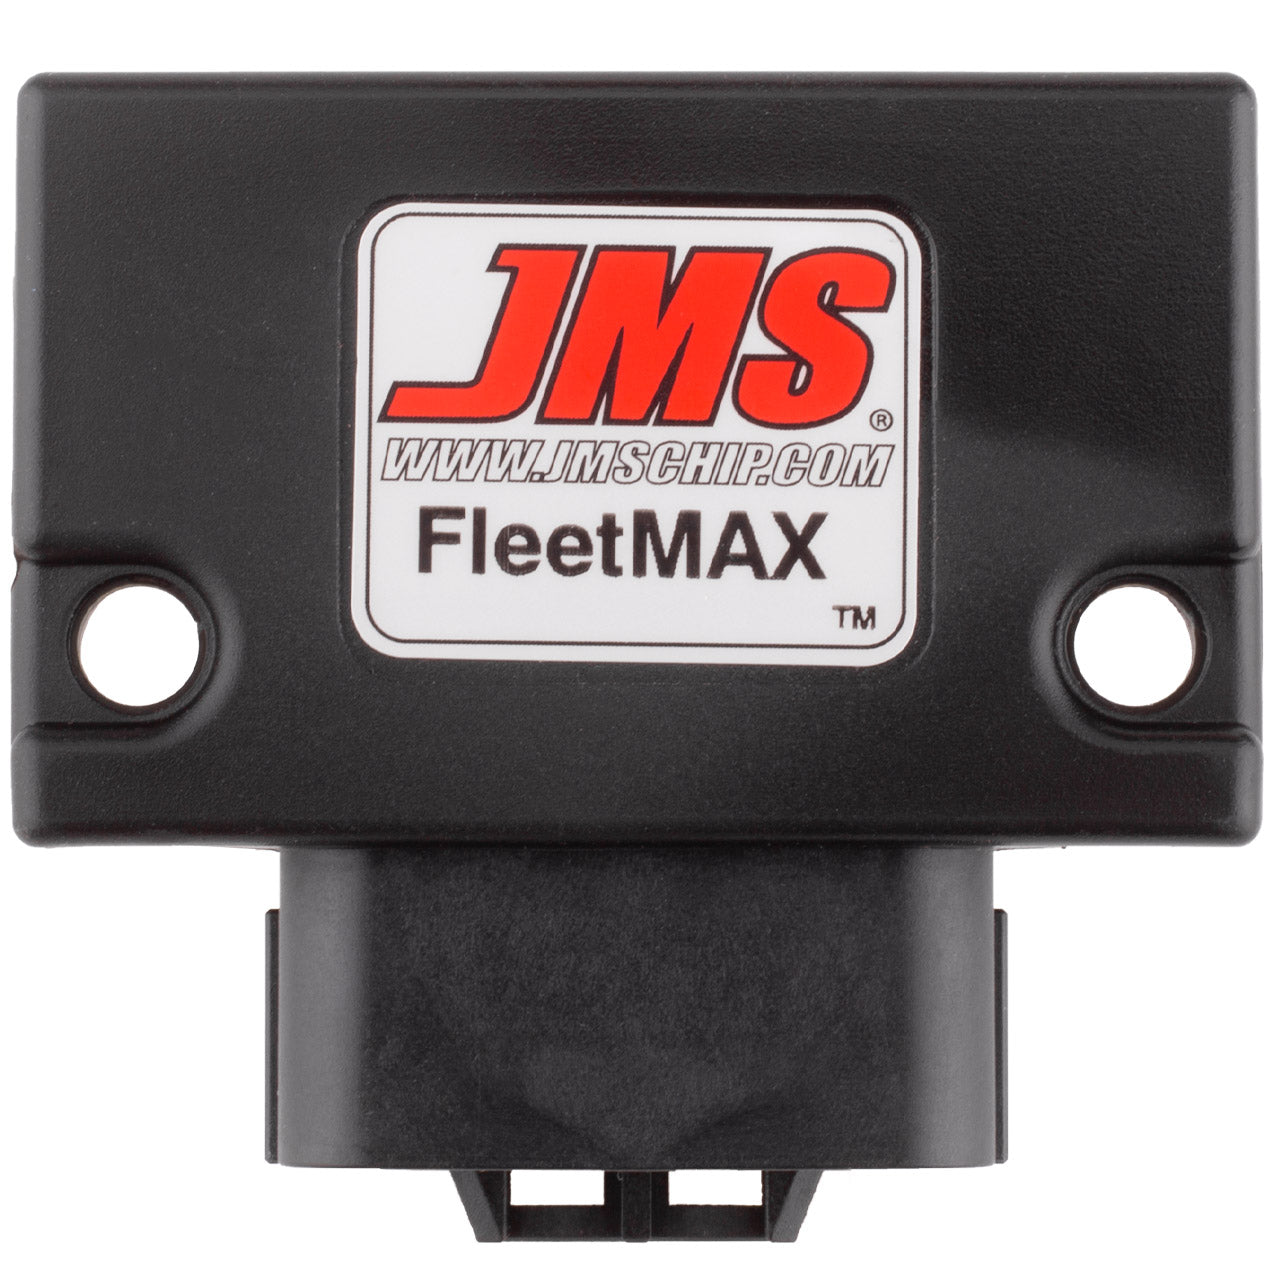 JMS FleetMAX Speed Control Device. Plug and Play for some 2003 - 2006 Dodge RAM Trucks with electronic throttle control FX71114DCX5